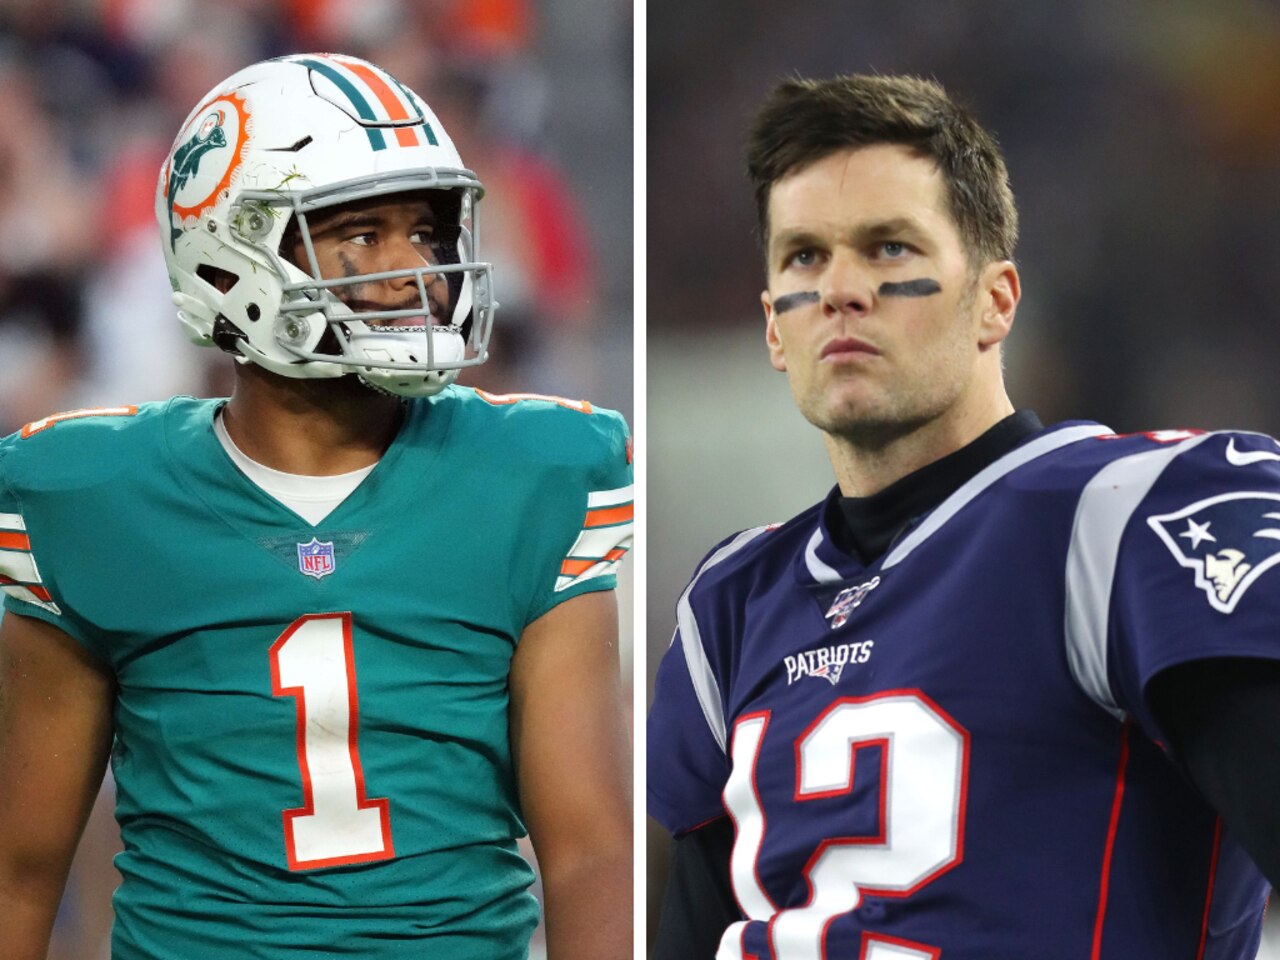 Miami punished for ‘unprecedented’ tampering with star quarterback Tom Brady